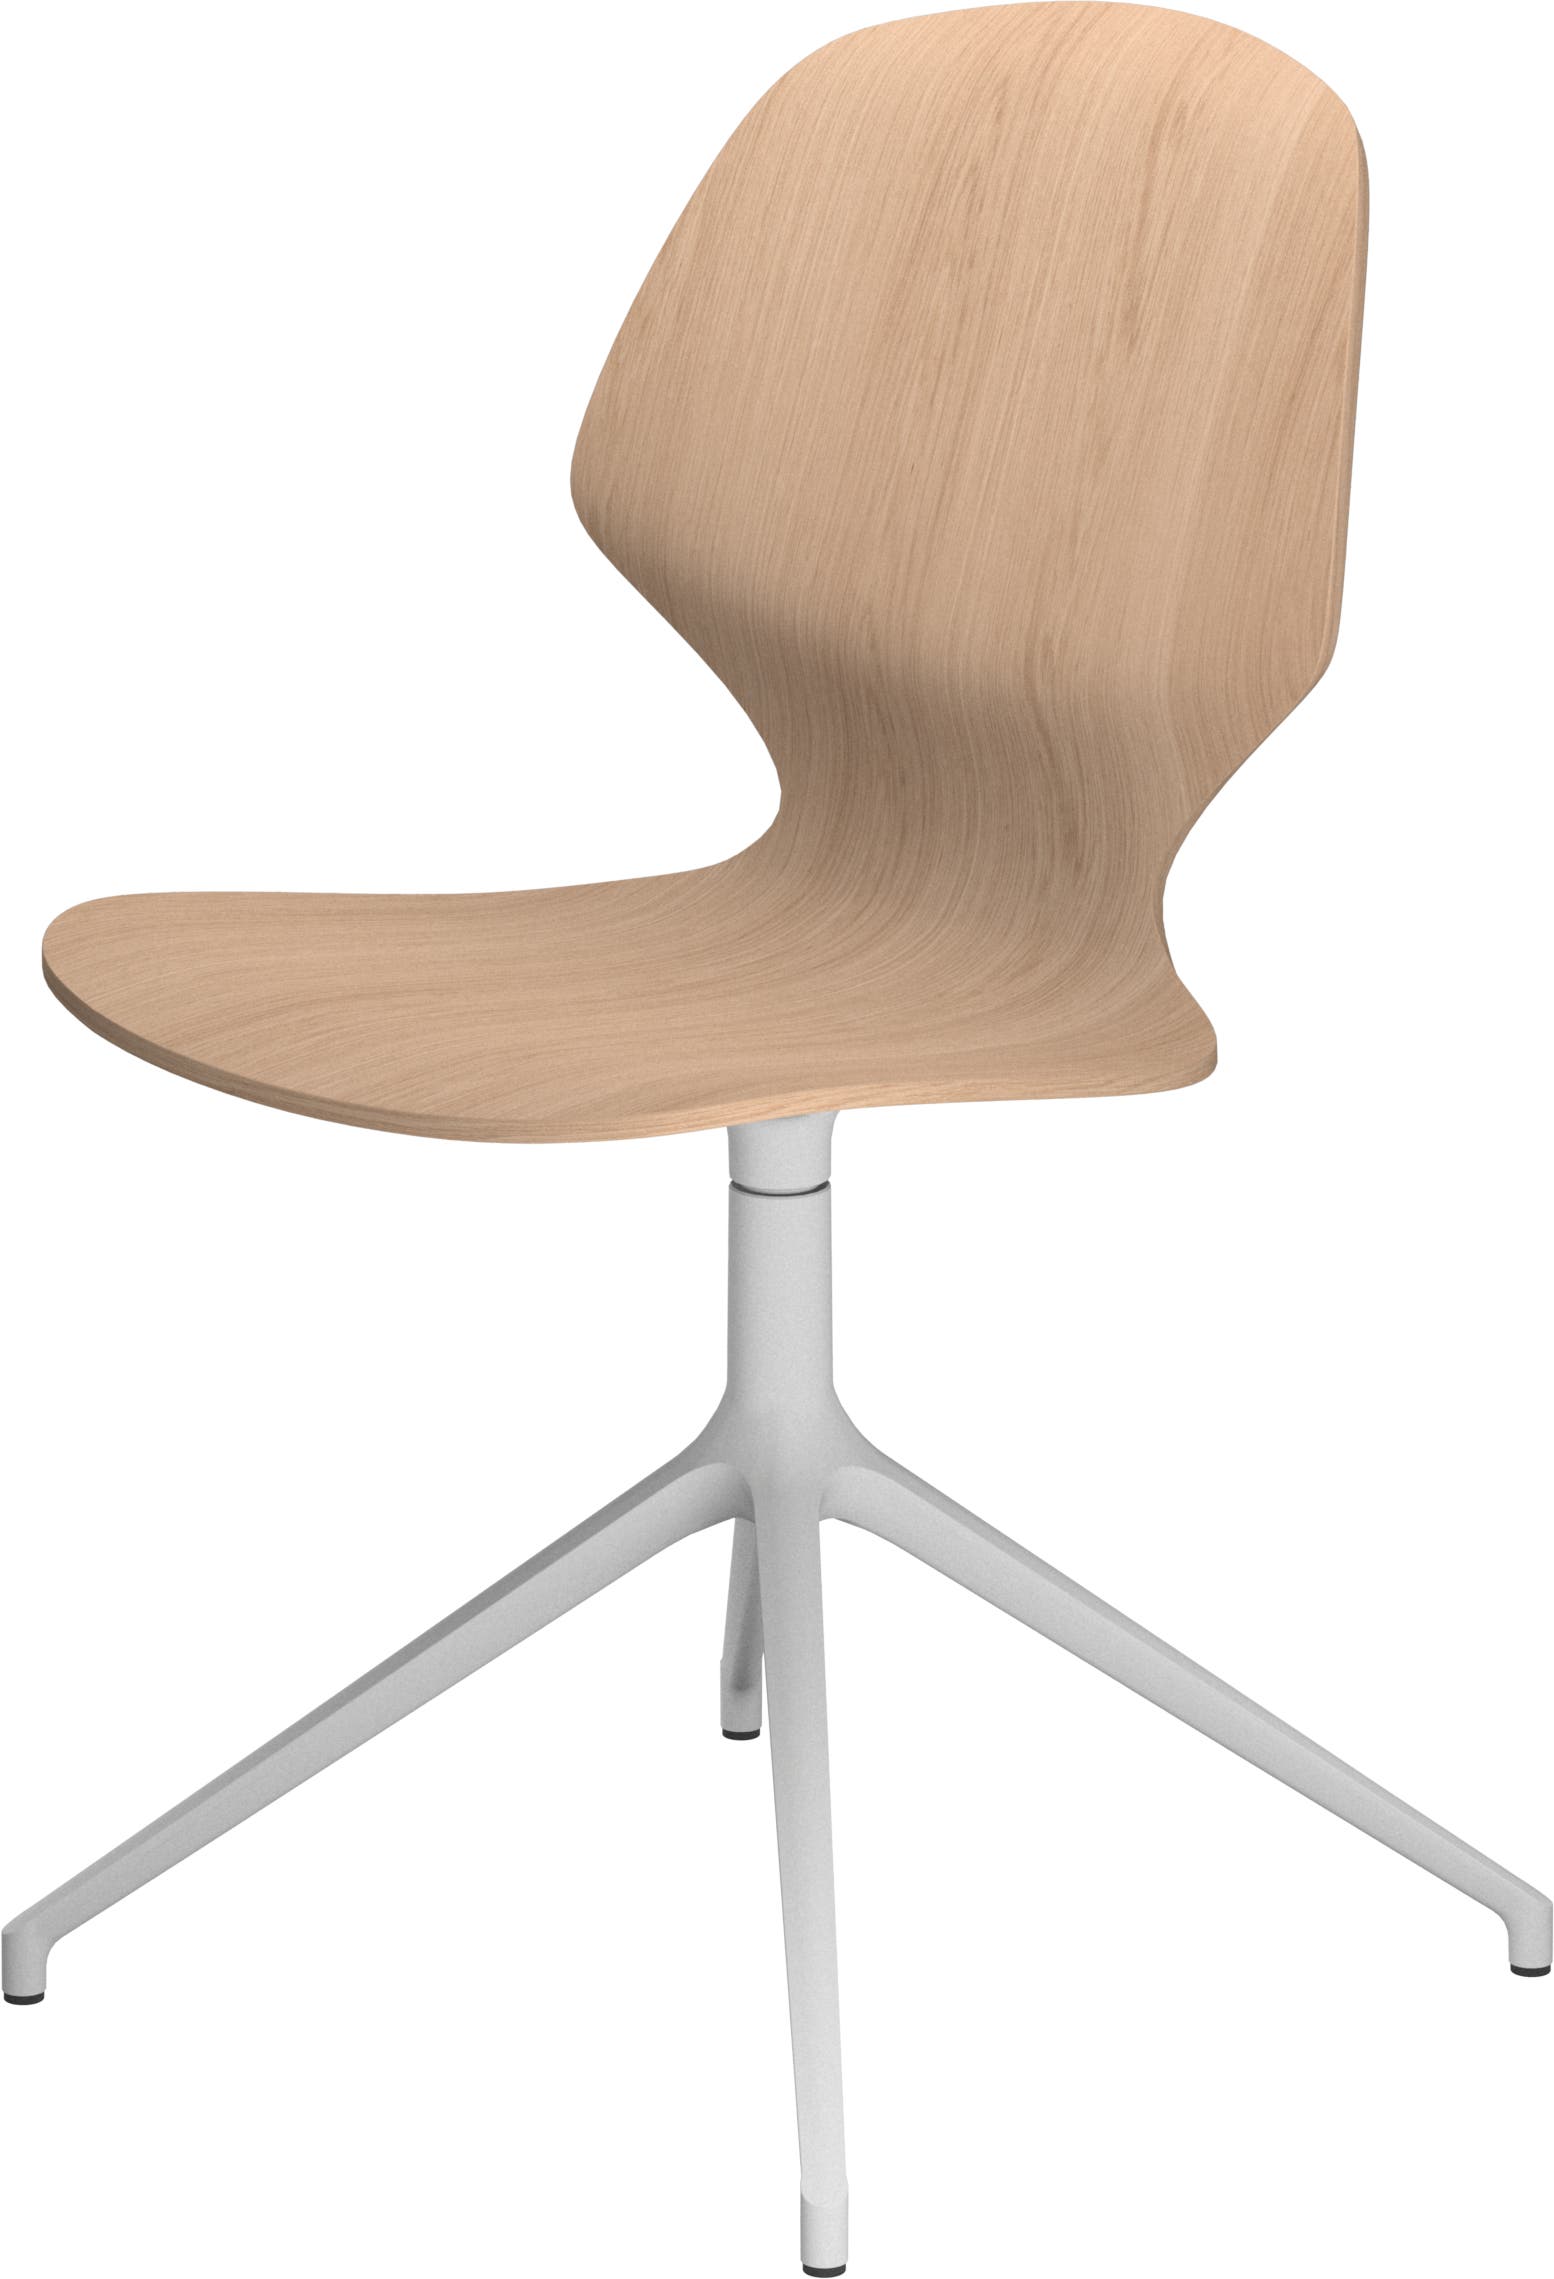 Florence chair with swivel function